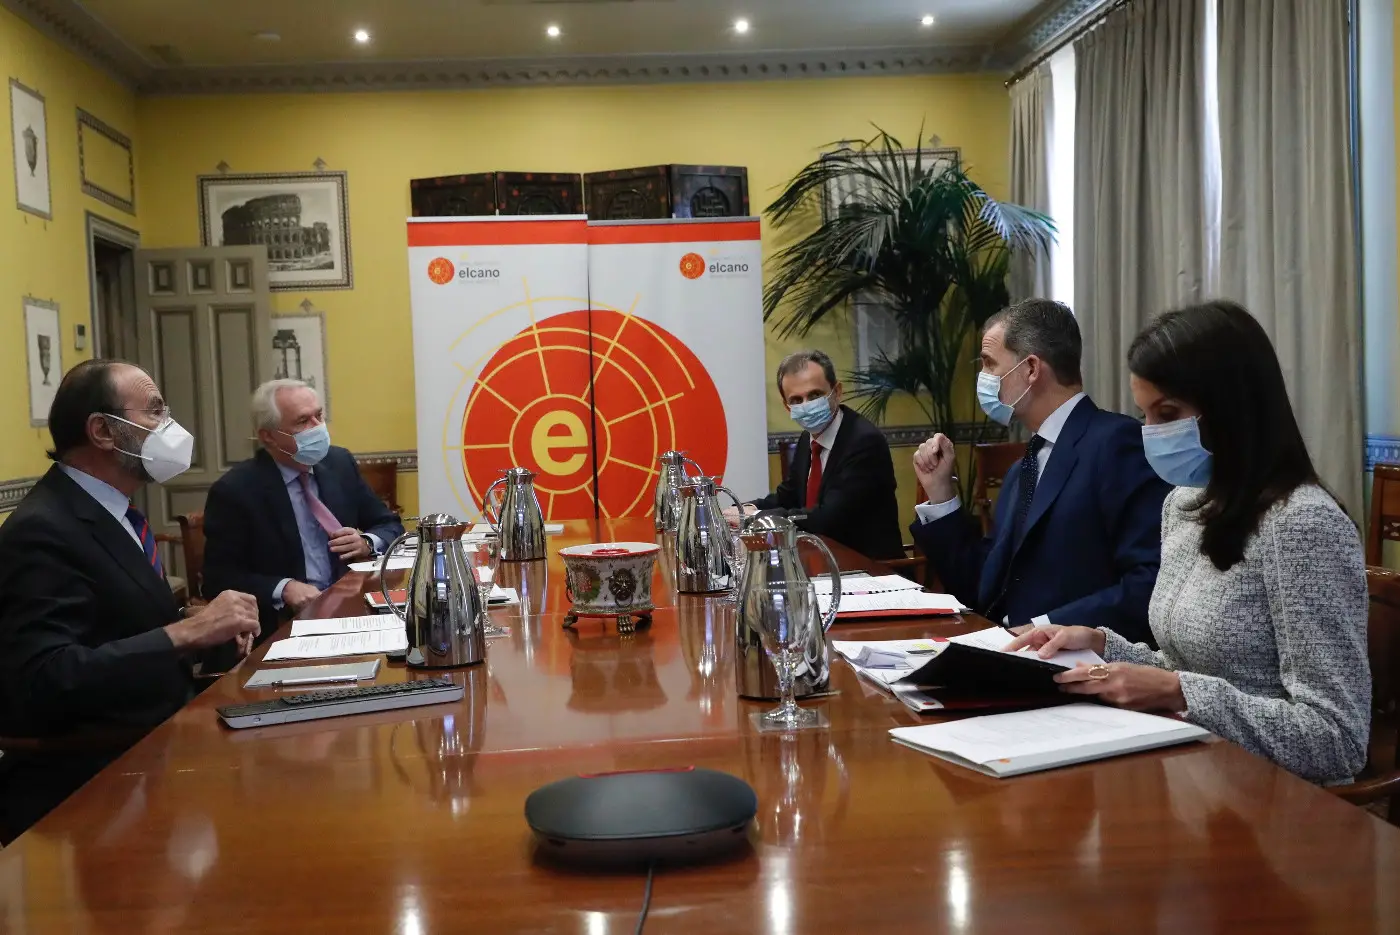 King Felipe and Queen Letizia of Spain visited Elcano Royal Institute to attend a meeting